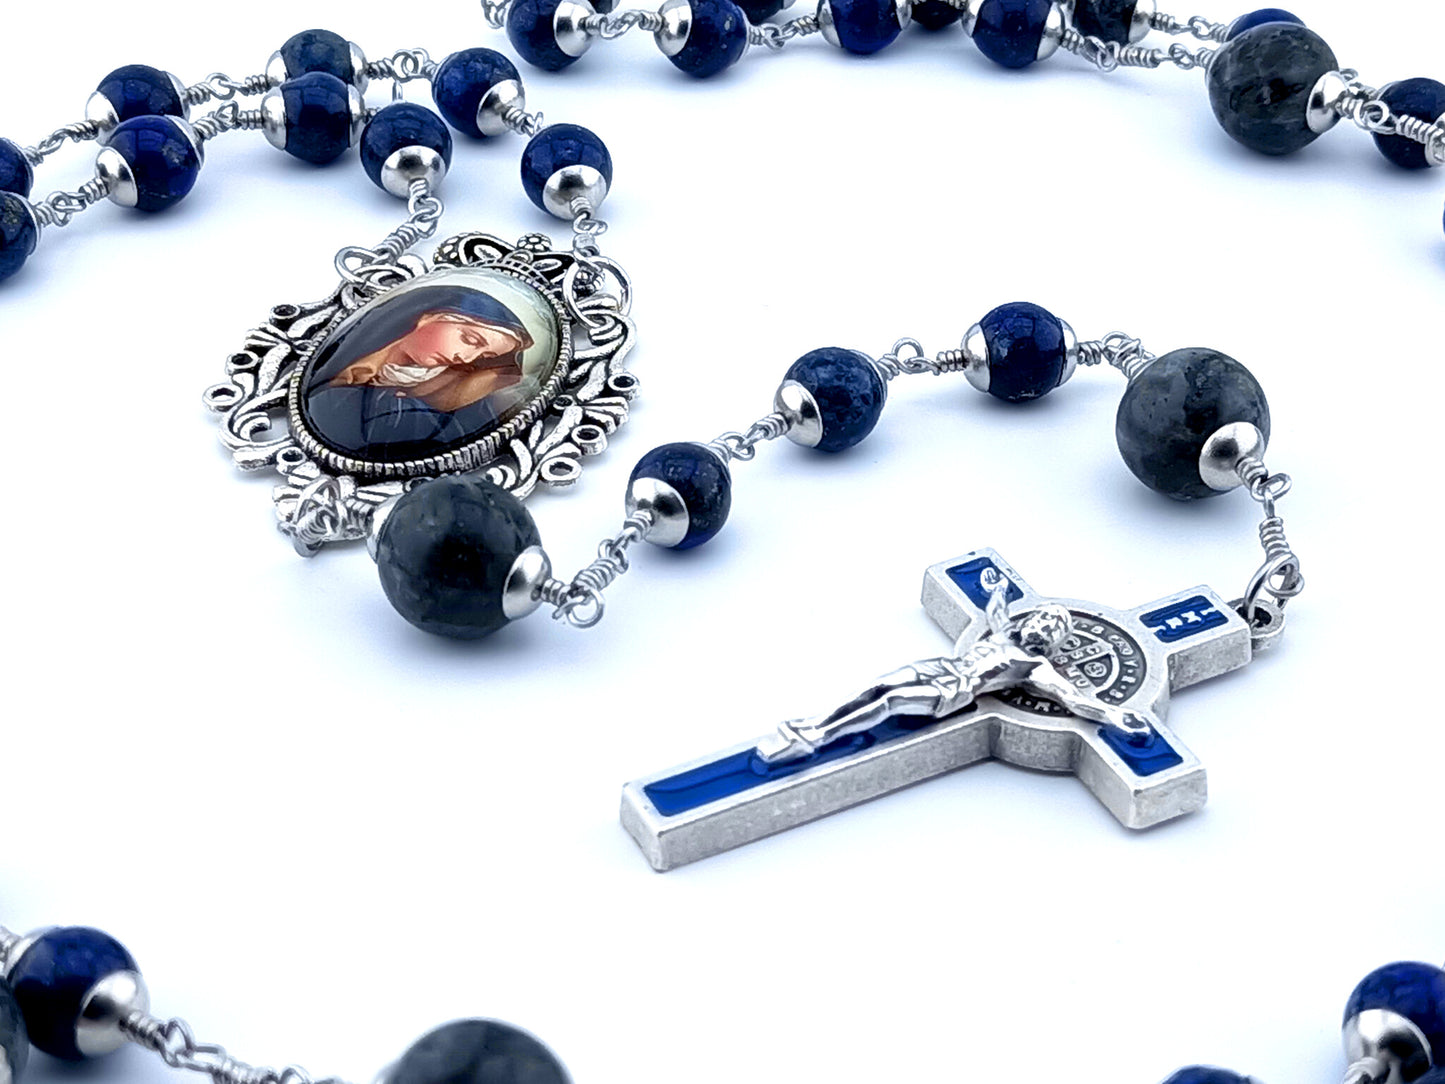 Our Lady of Sorrows unbreakable unique rosary beads with lapis lazuli beads, silver and blue enamel crucifix and picture centre medal.